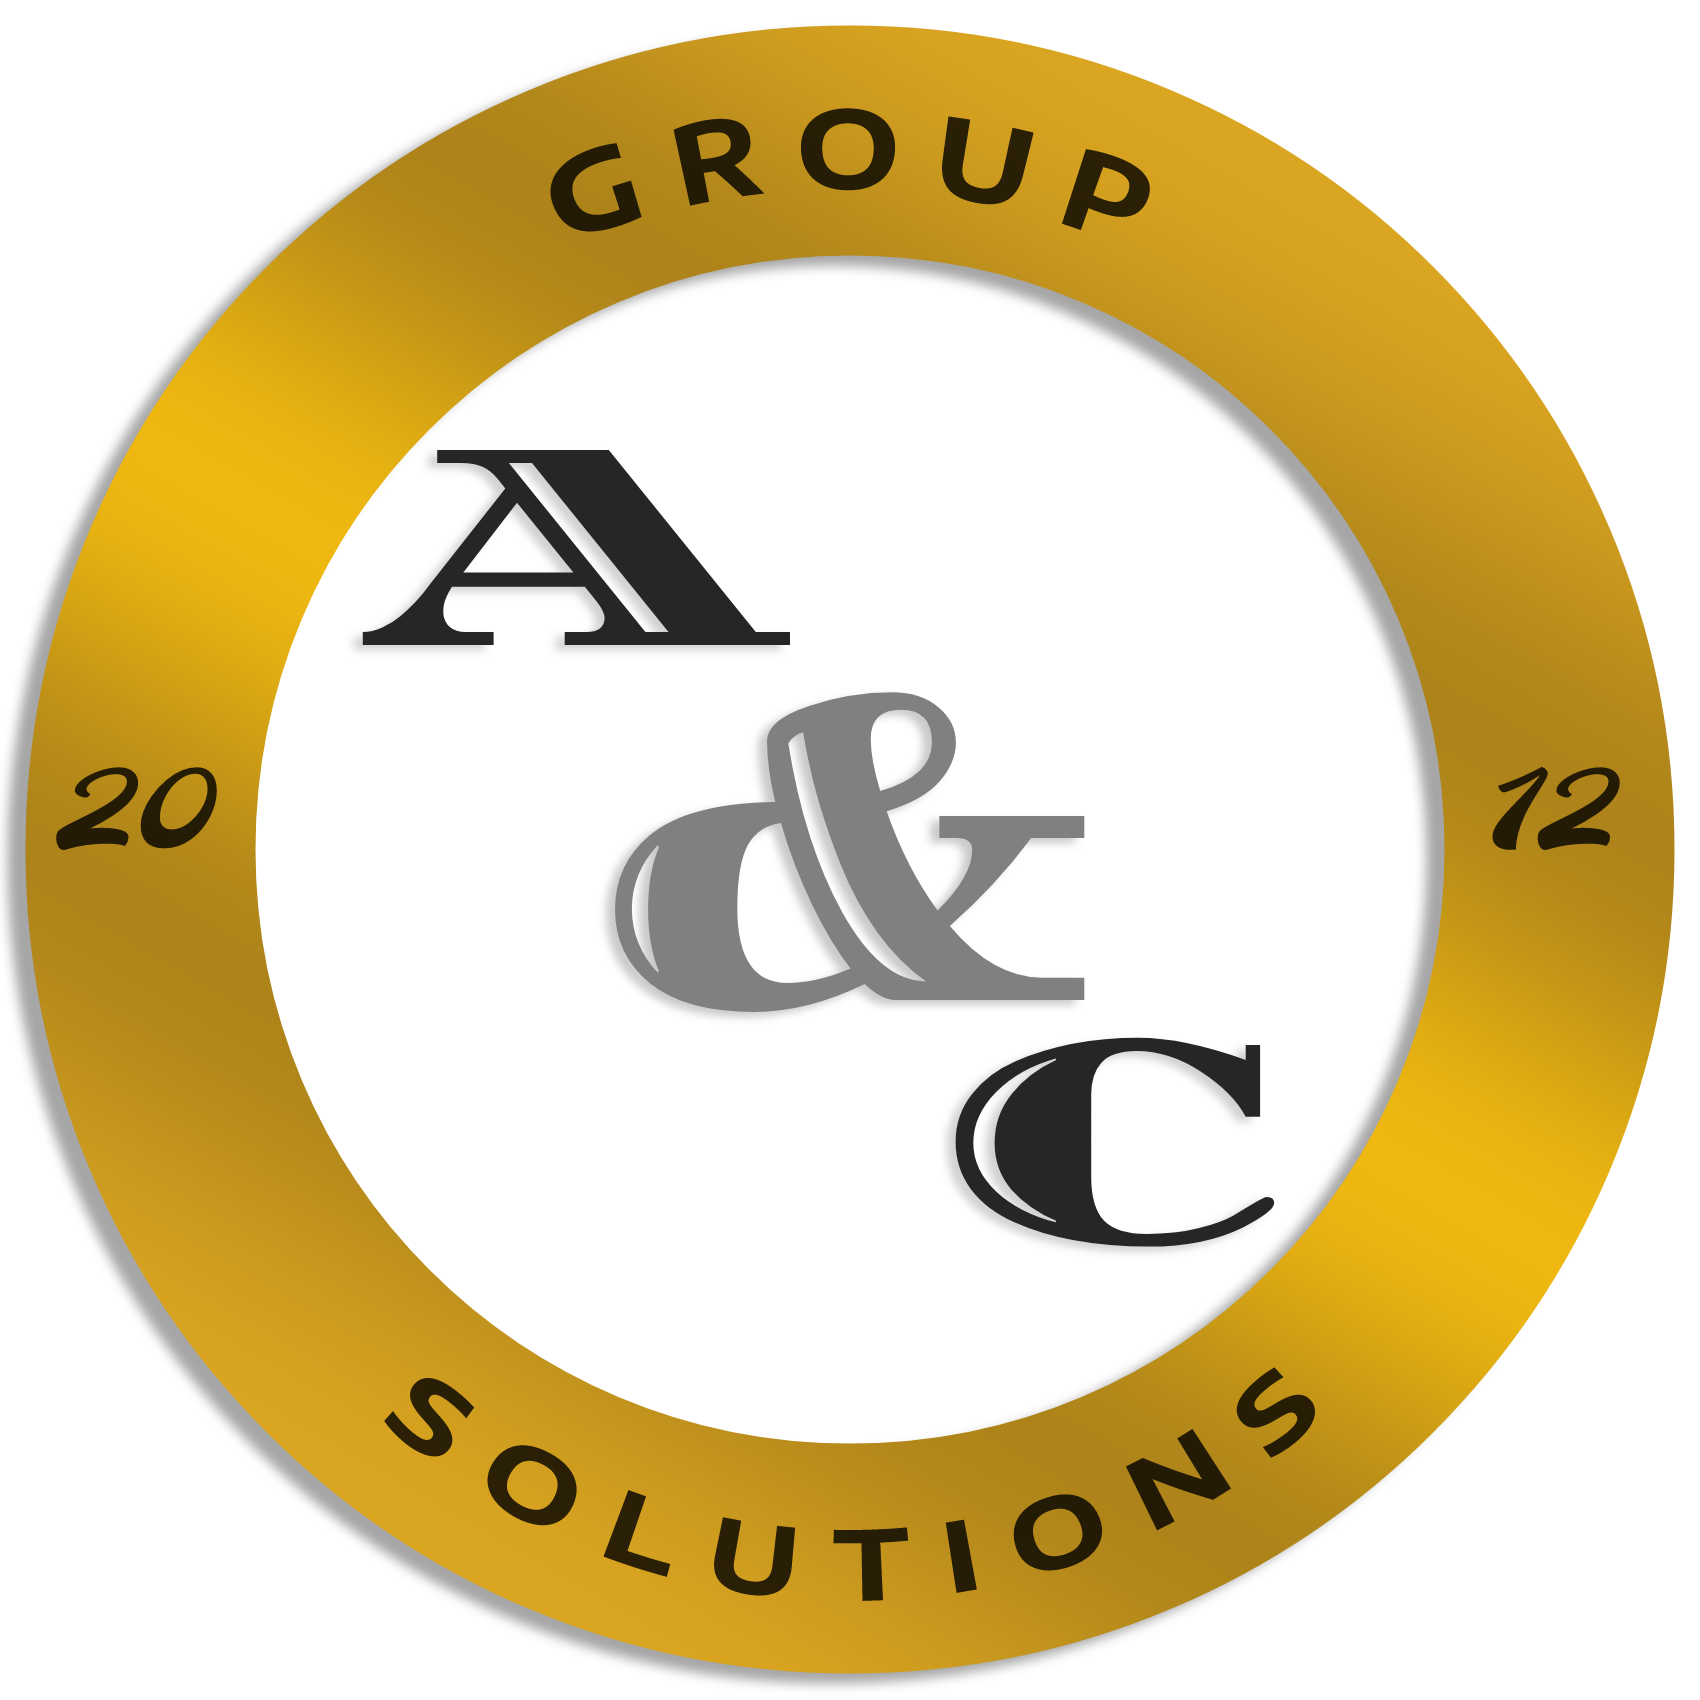 A&C Solutions